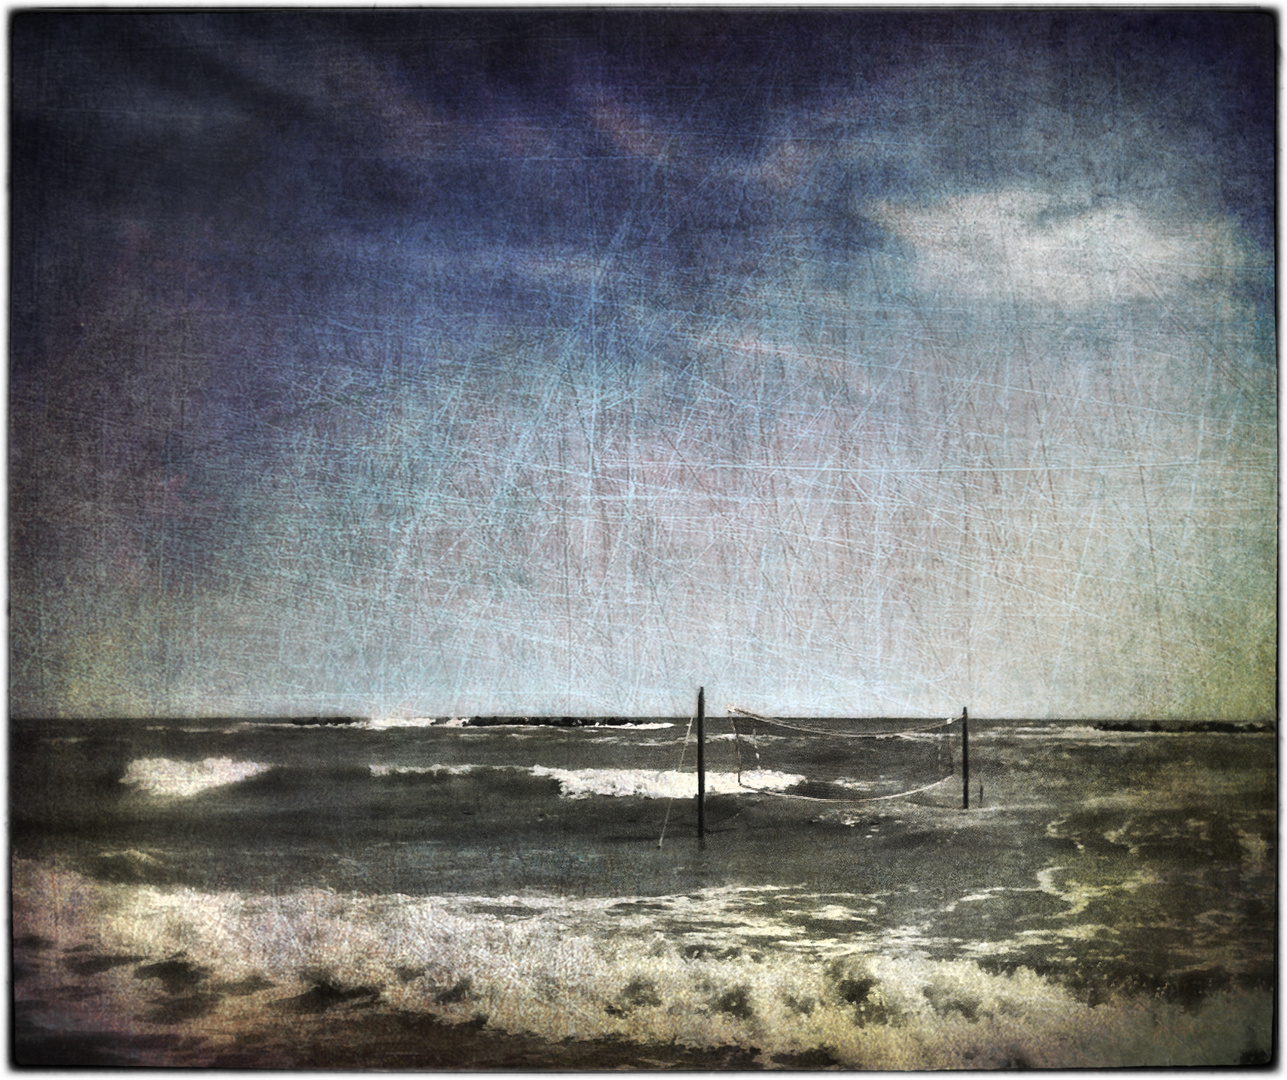 Iphoneography 1 il mare